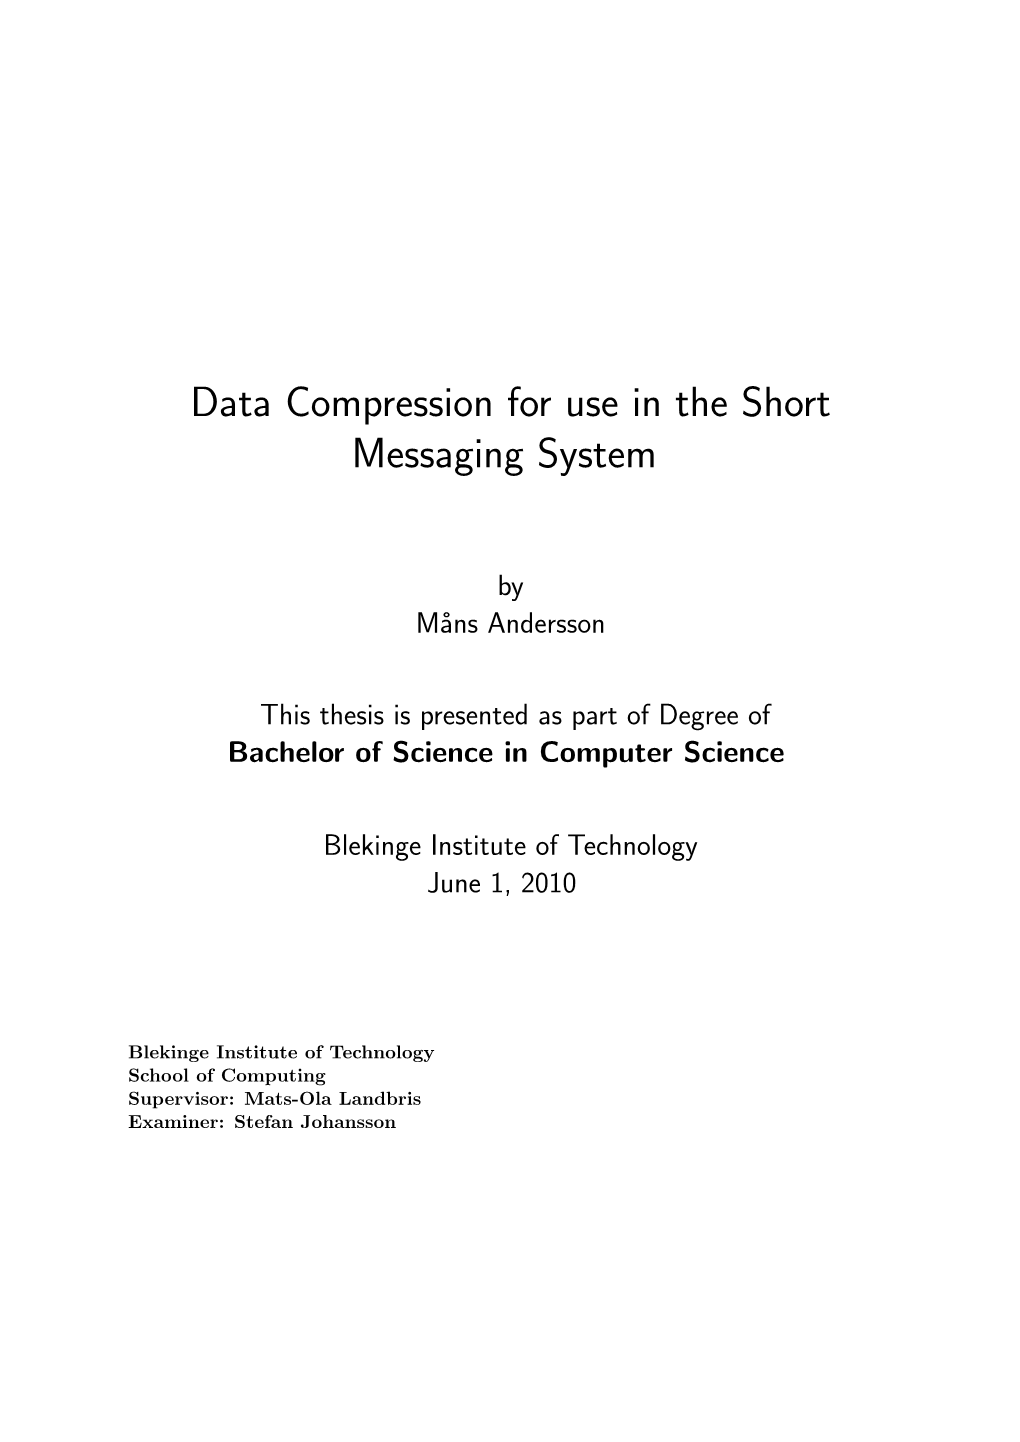 Bachelor Thesis I Will Take a Closer Look on Algorithms for Compressing Data